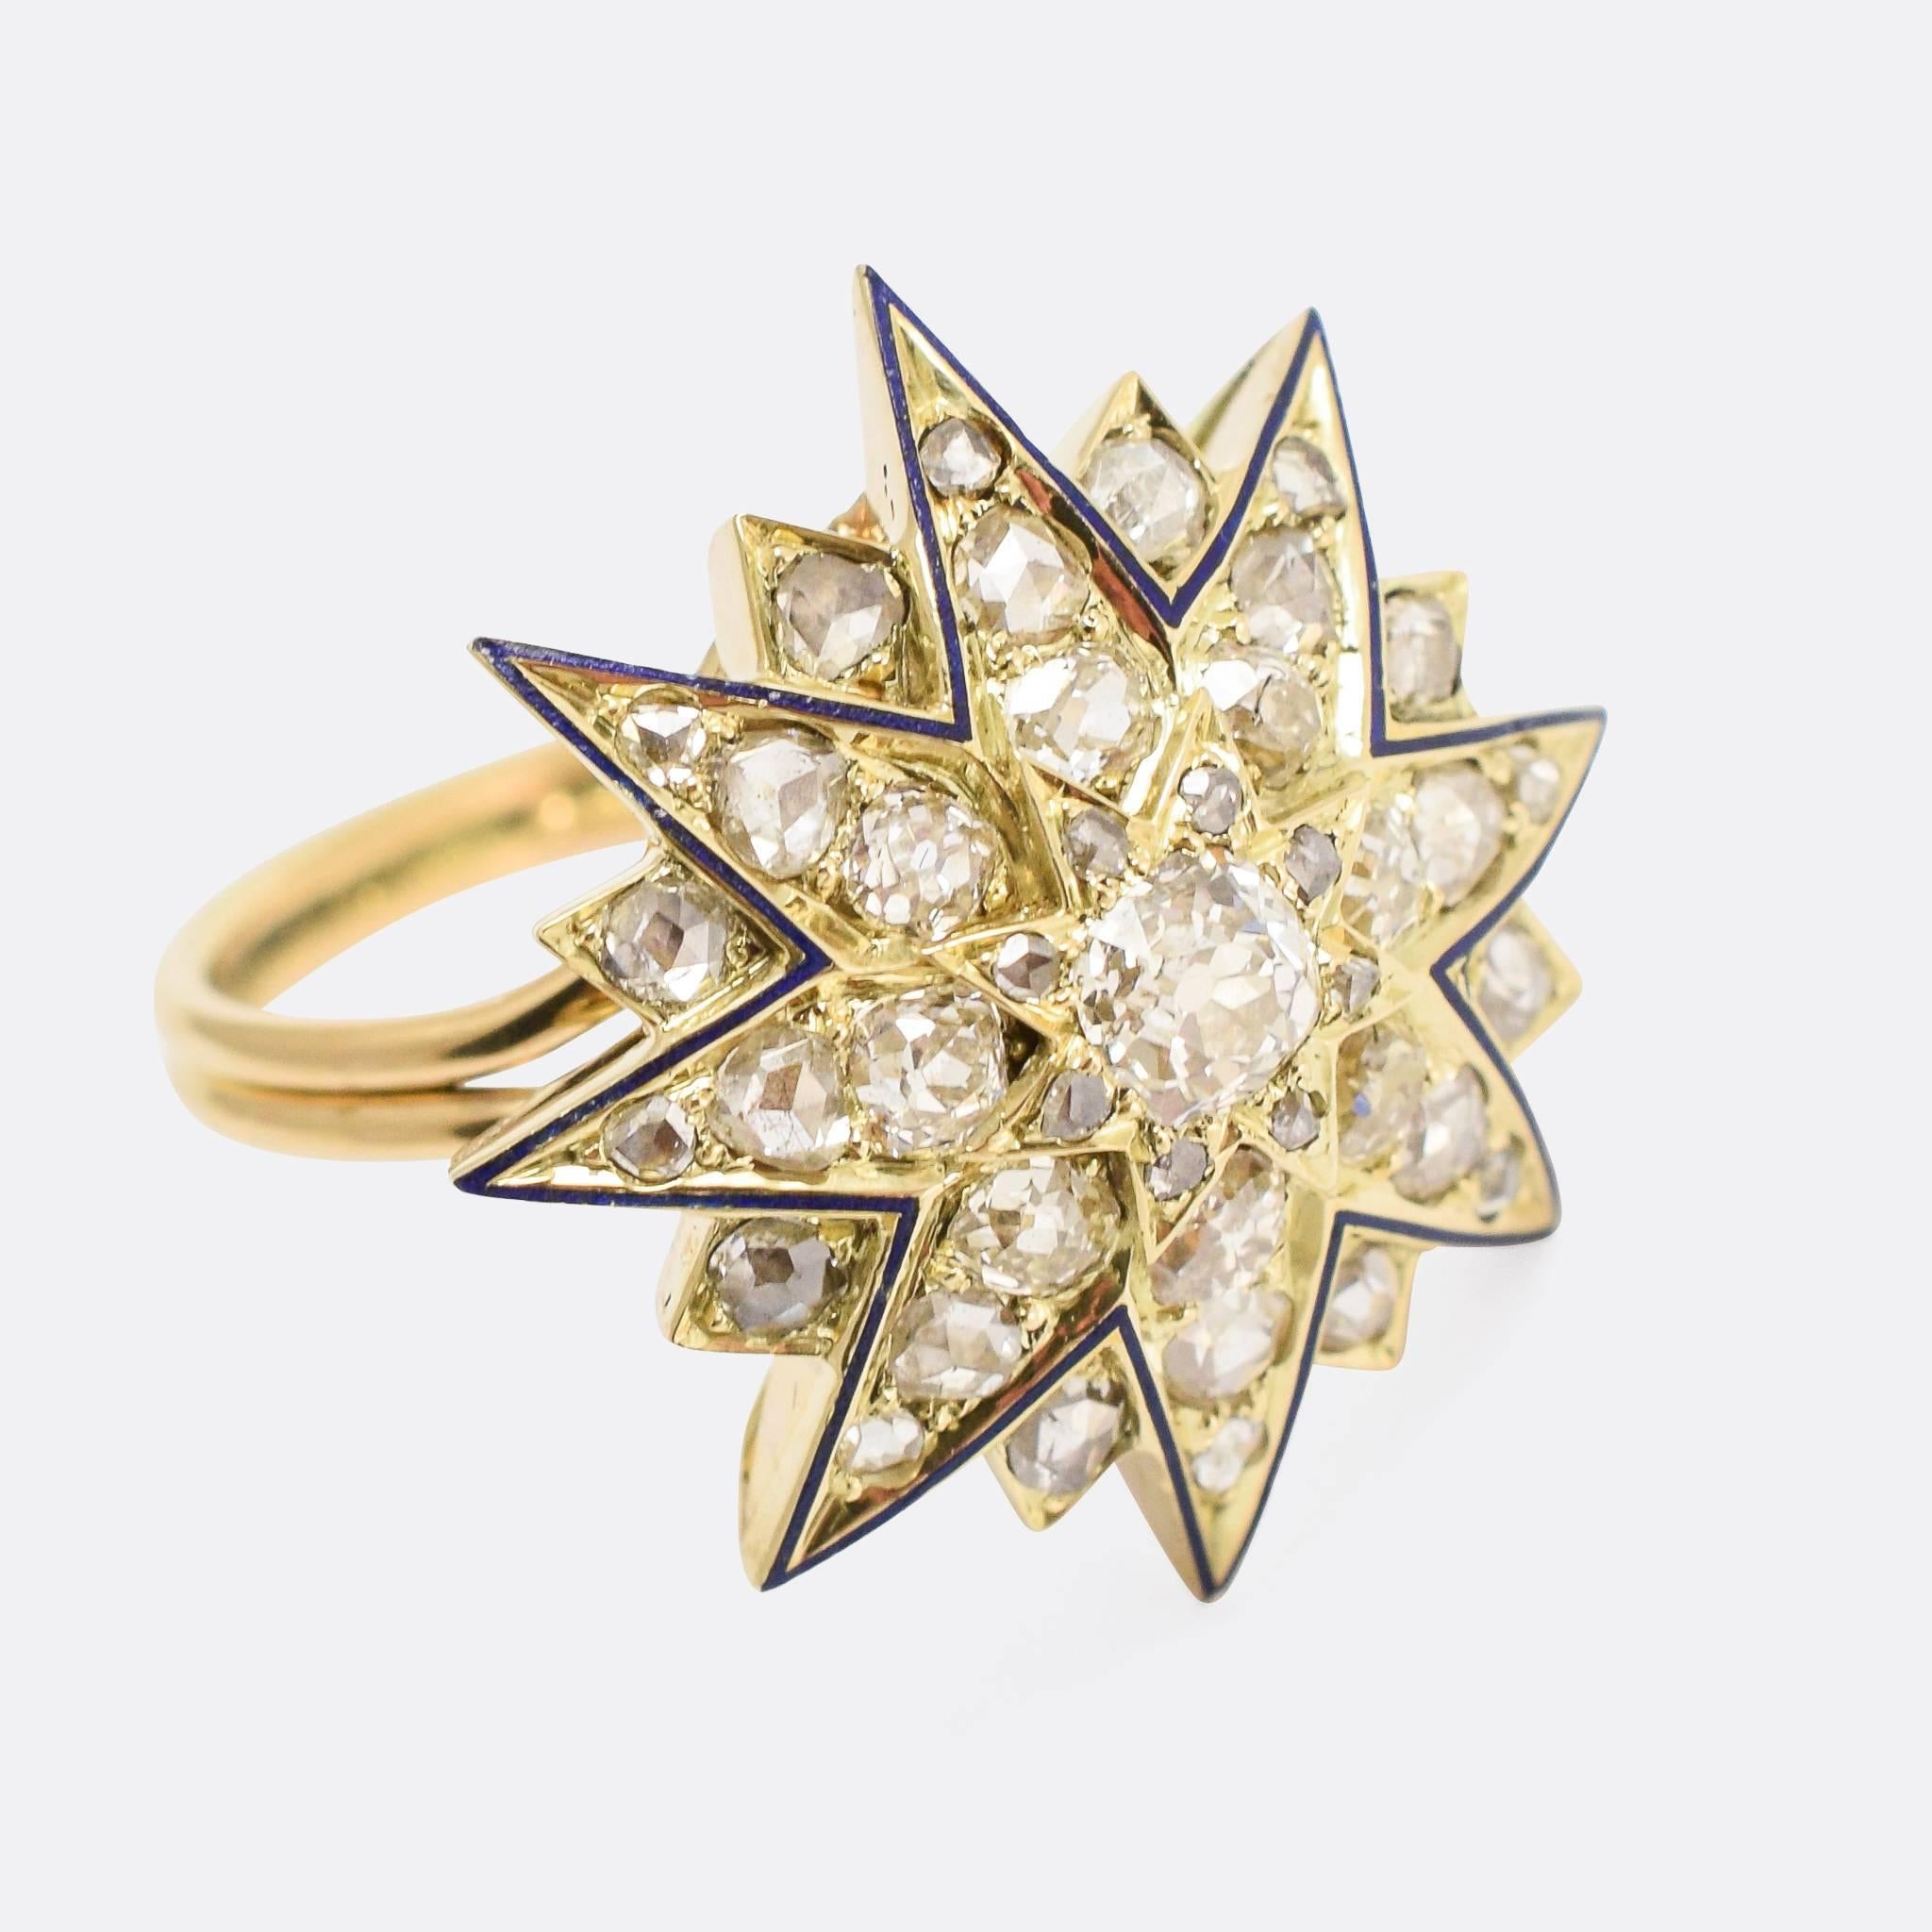 An incredible star ring converted from a Victorian era brooch. The head is set with around 1.8 carats of old mine cut diamonds, and finished in fine deep blue enamel. The head rests on a gold reeded band, and maintains a low profile against the